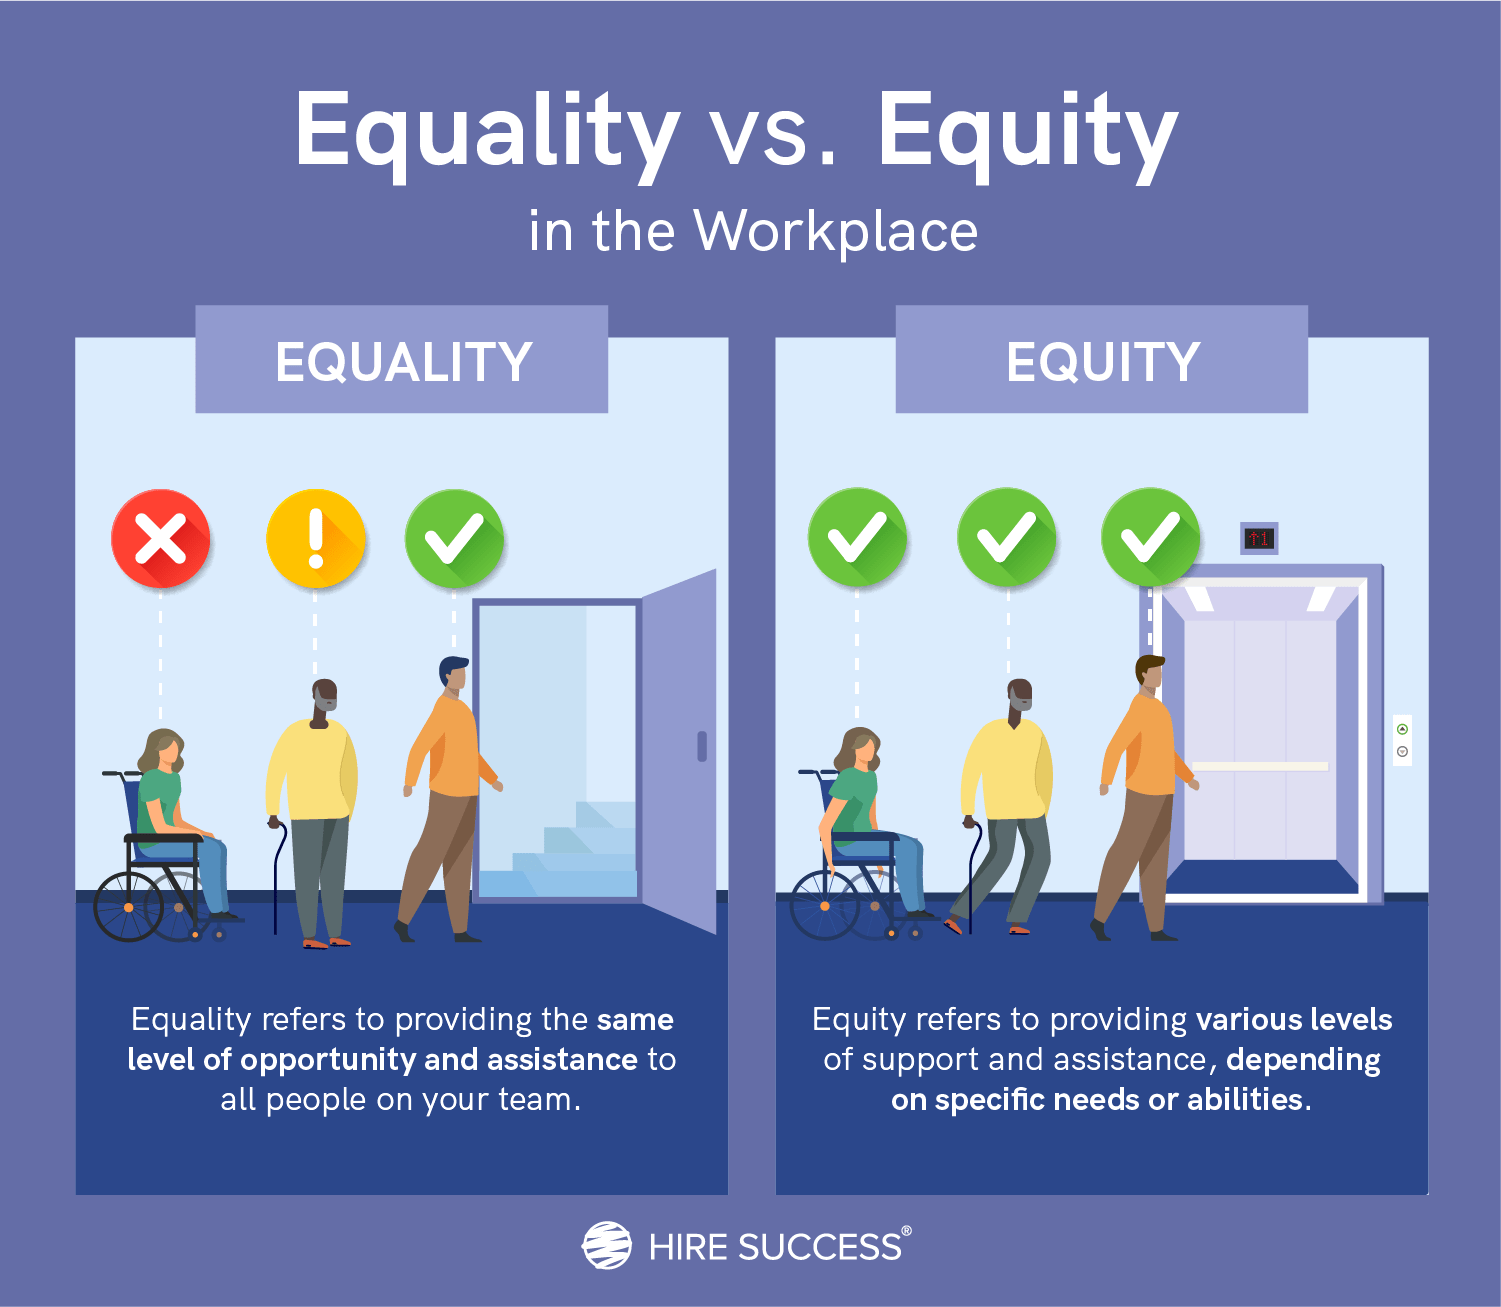 Equality vs equity in the workplace